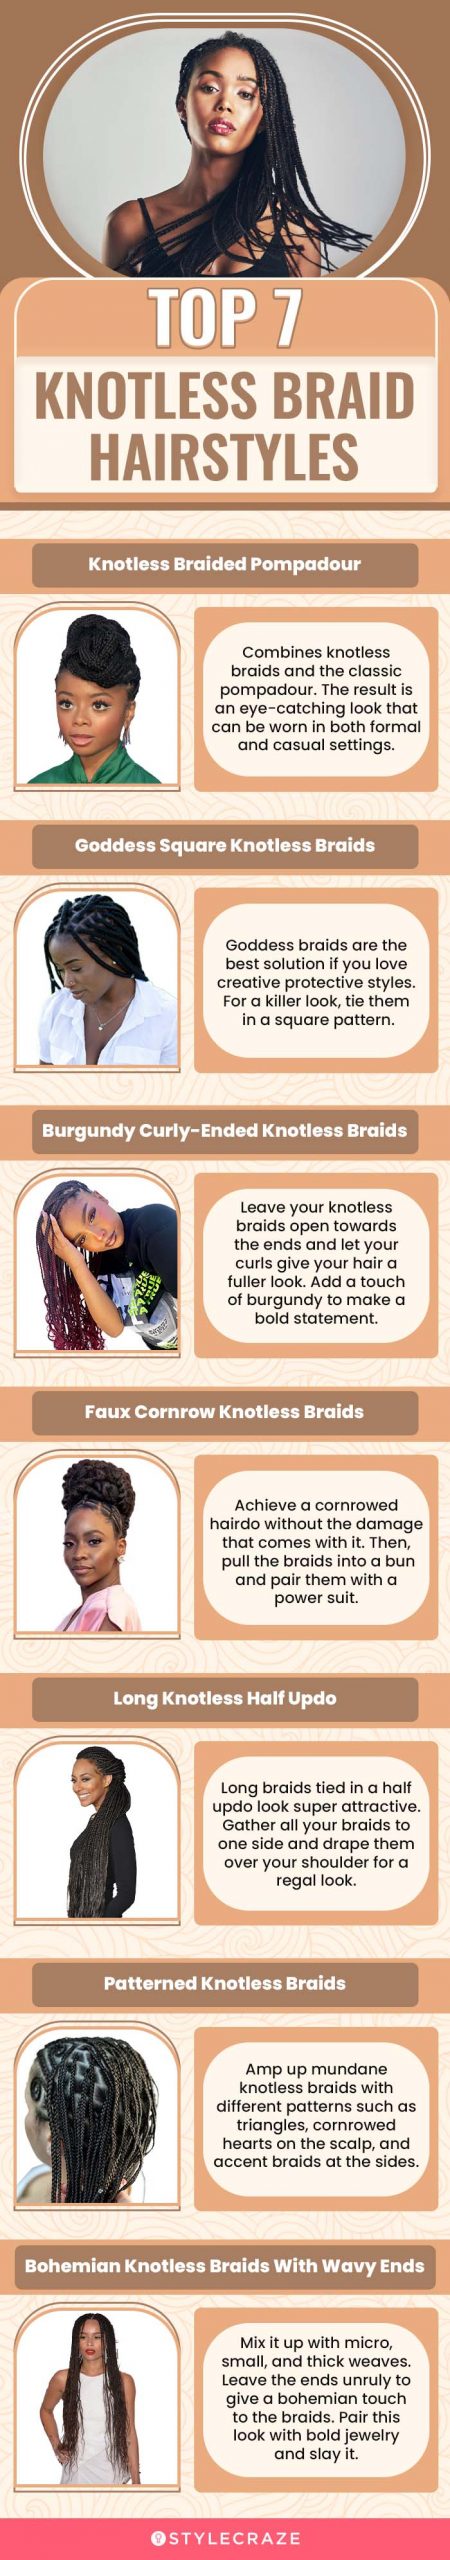 top 7 knotless braid hairstyles (infographic)